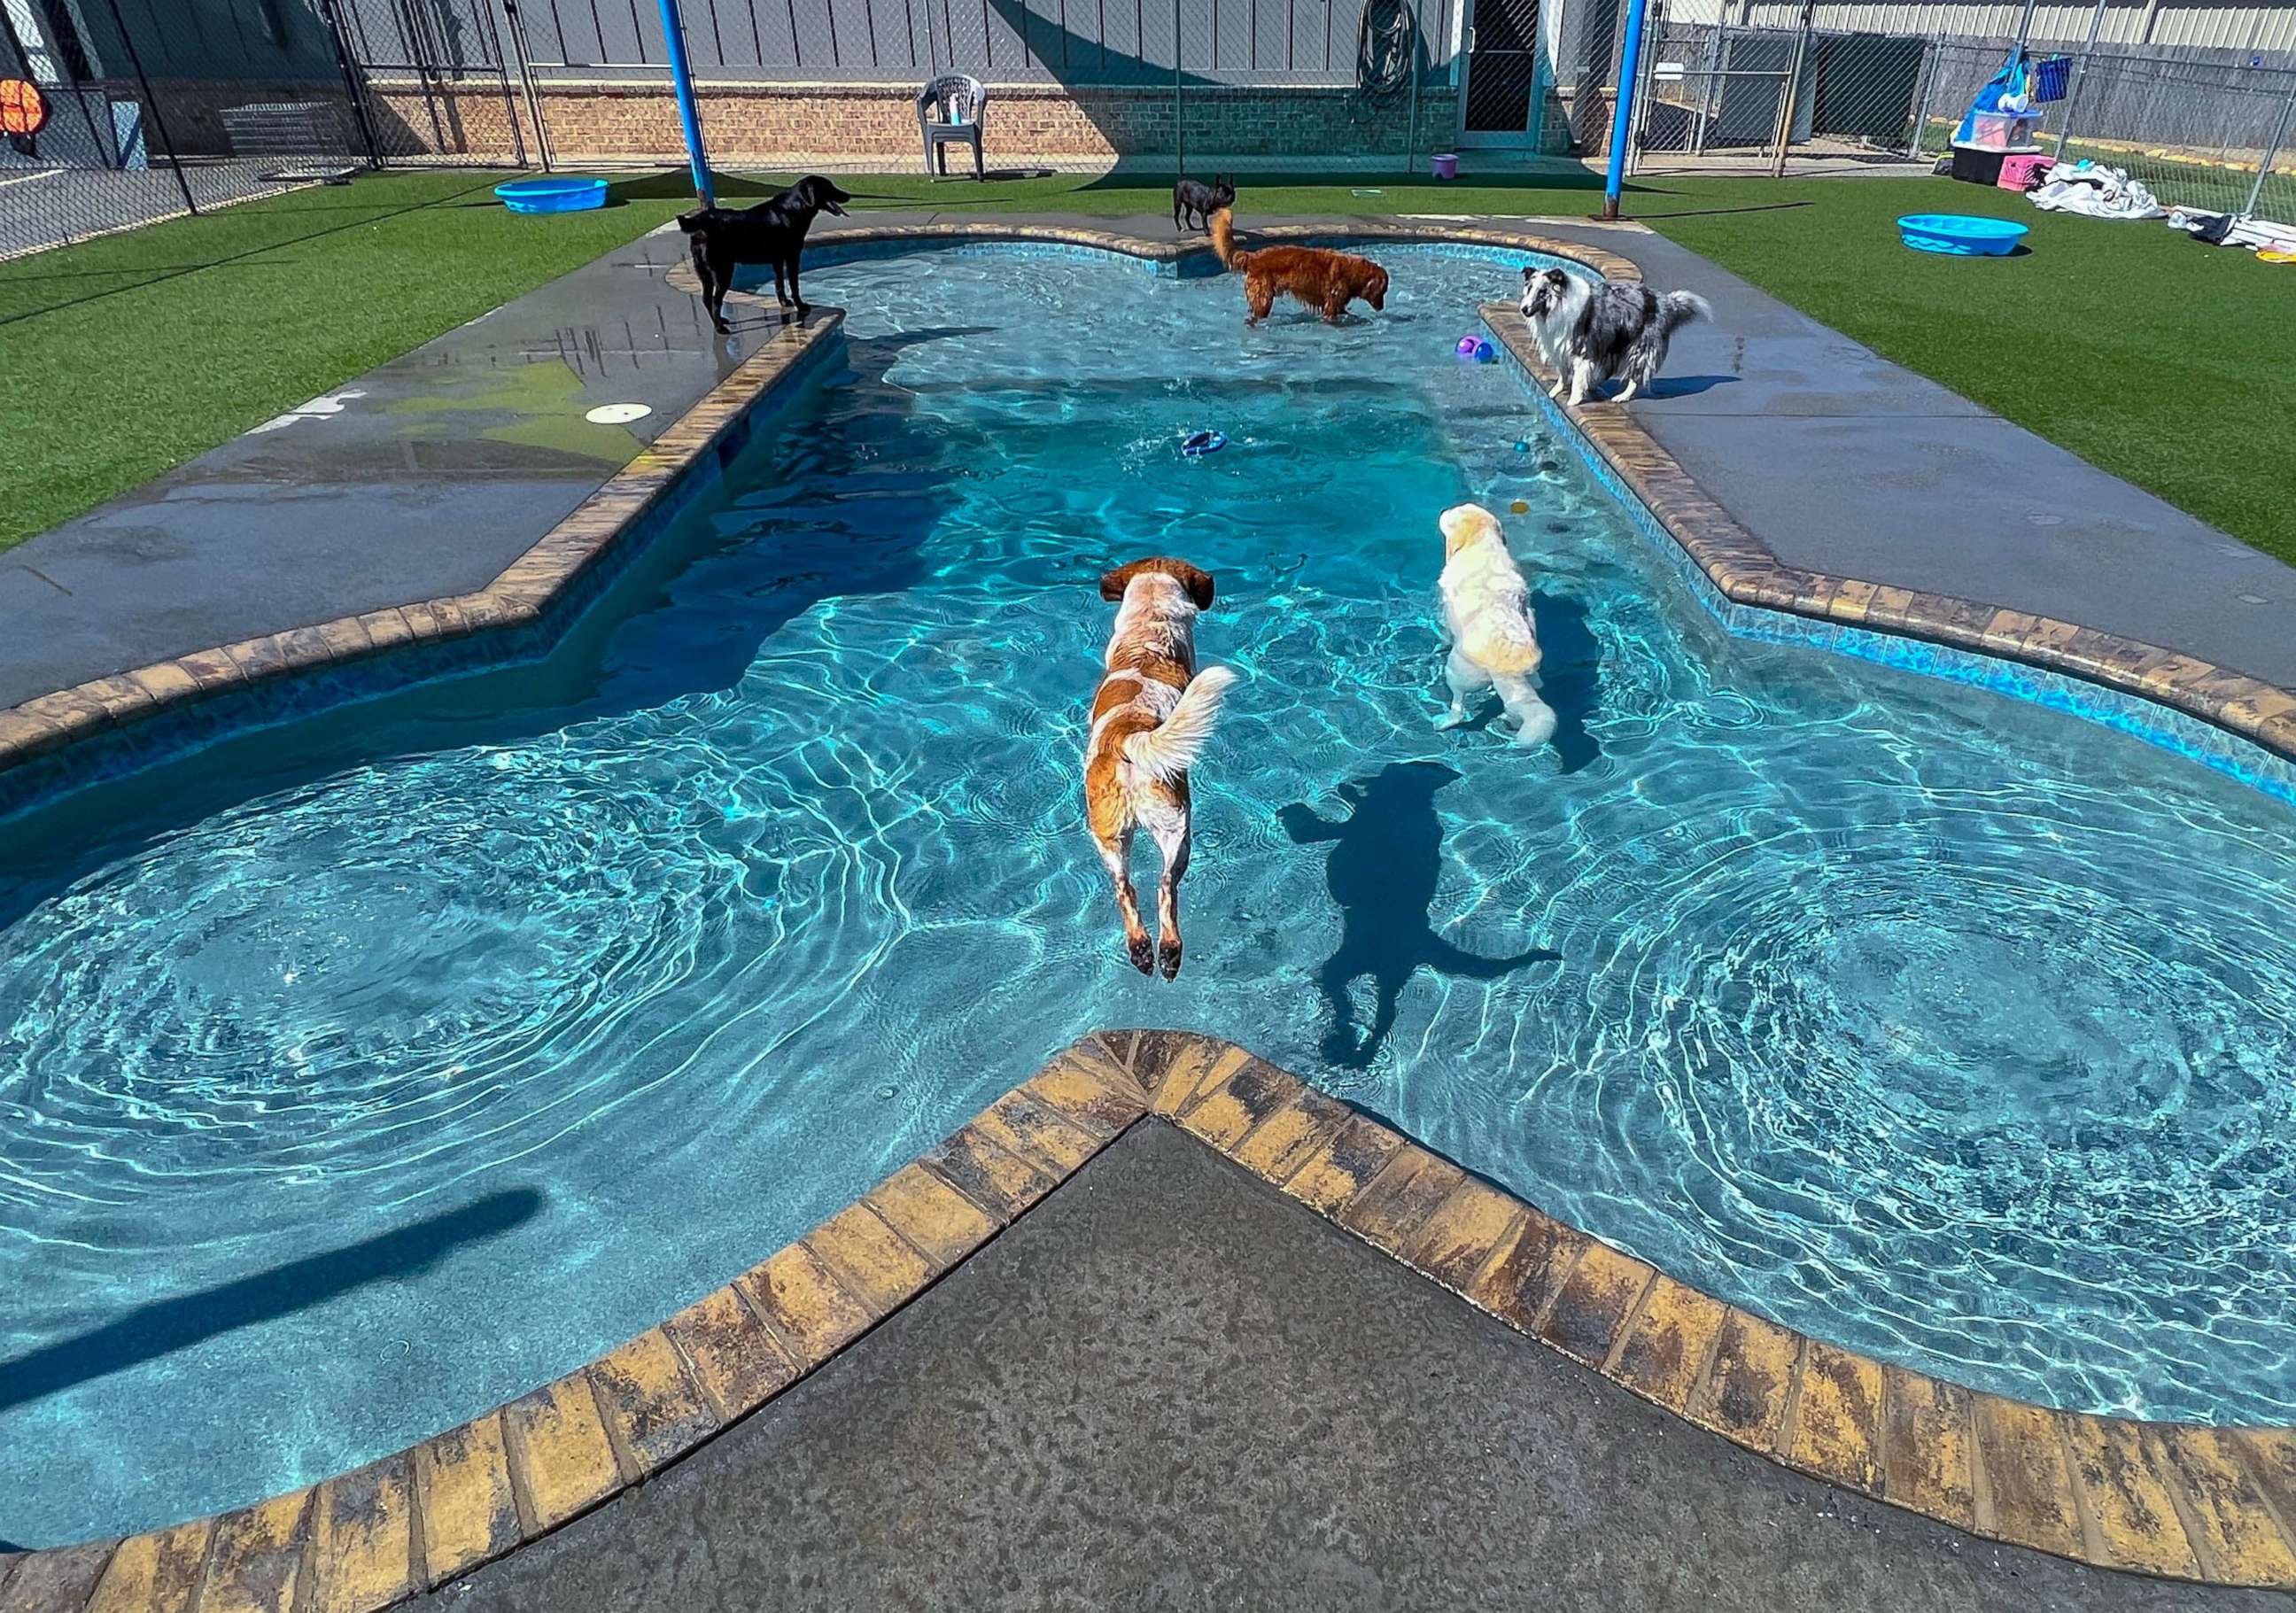 PHOTO: Dogs cool off in a dog-bone shaped swimming pool at a pet boarding business in Anderson County, S.C., June 21, 2022.